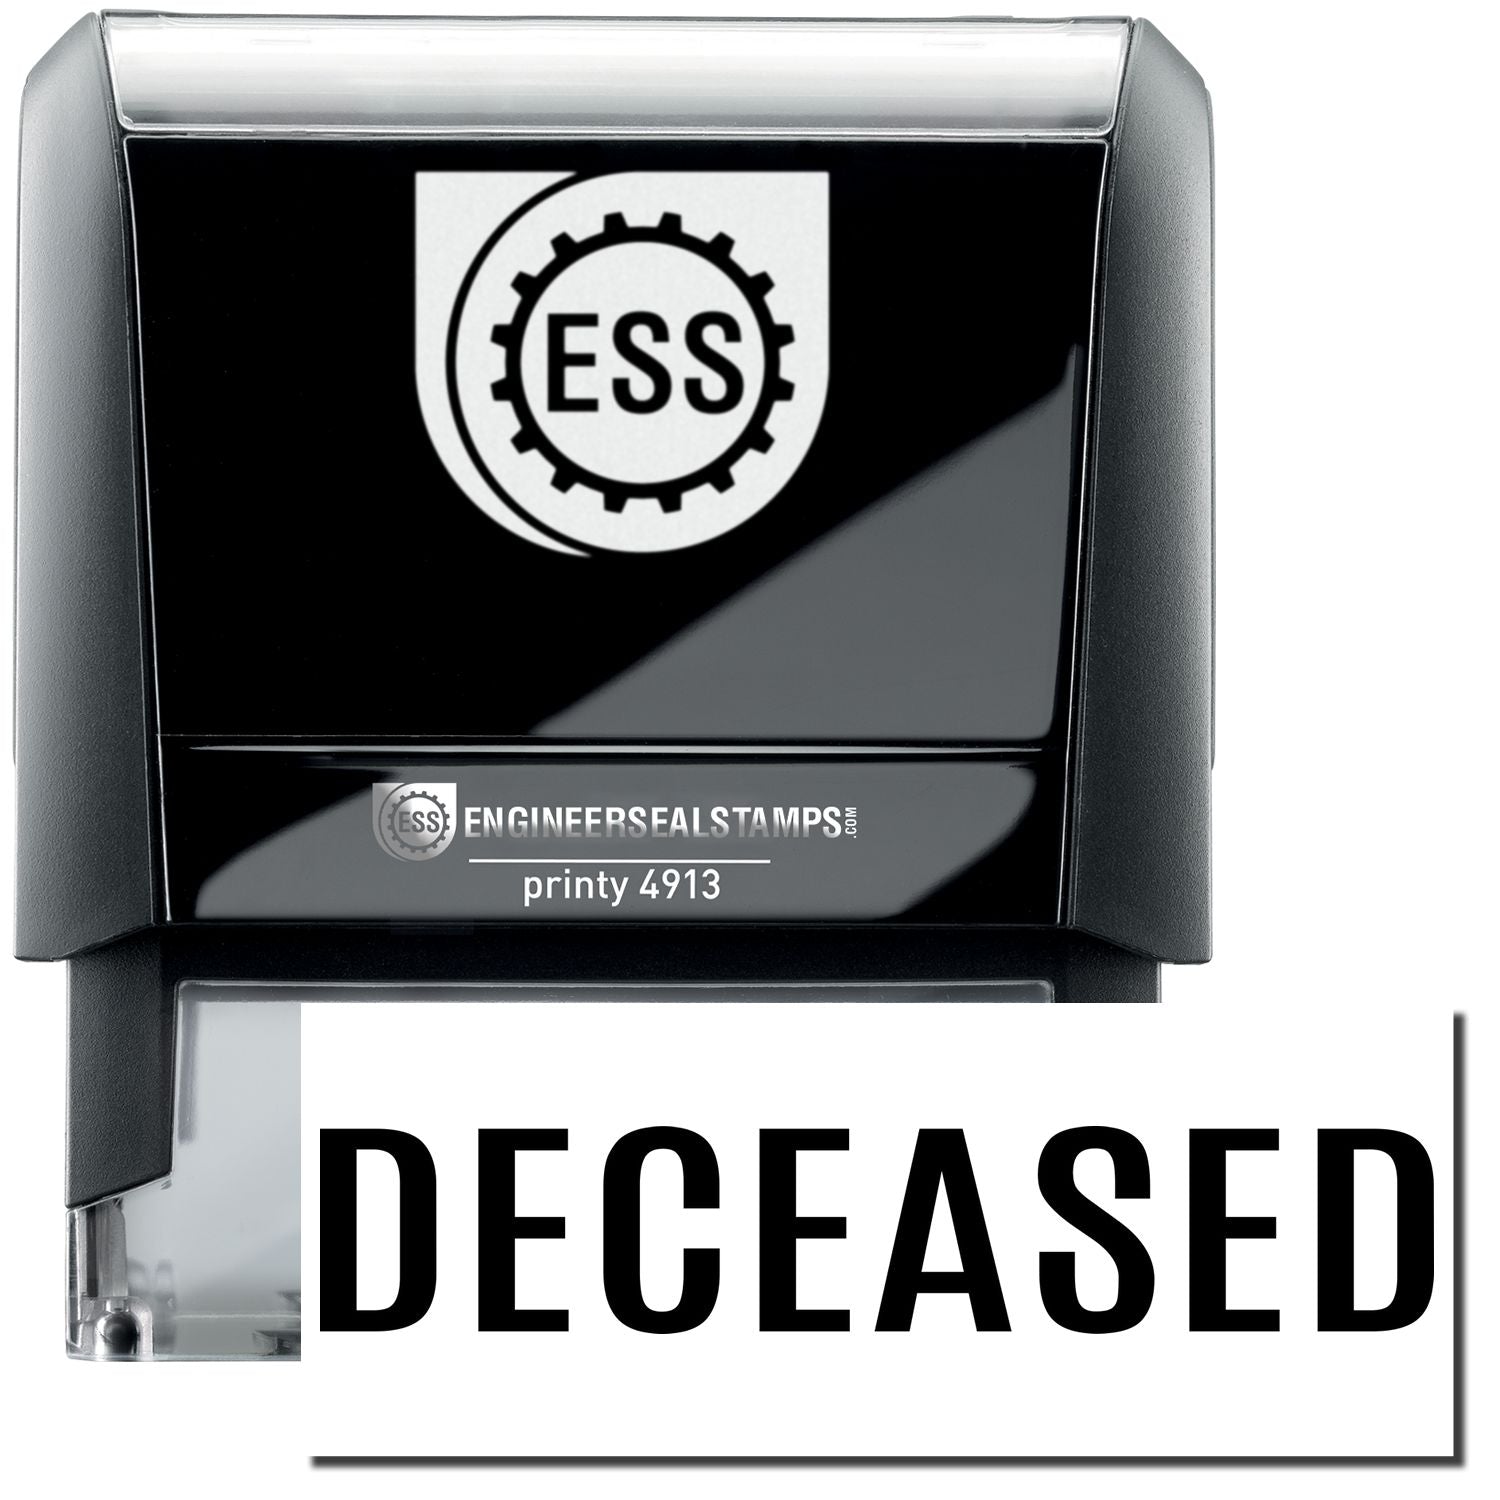 A self-inking stamp with a stamped image showing how the text "DECEASED" in a large bold font is displayed by it after stamping.